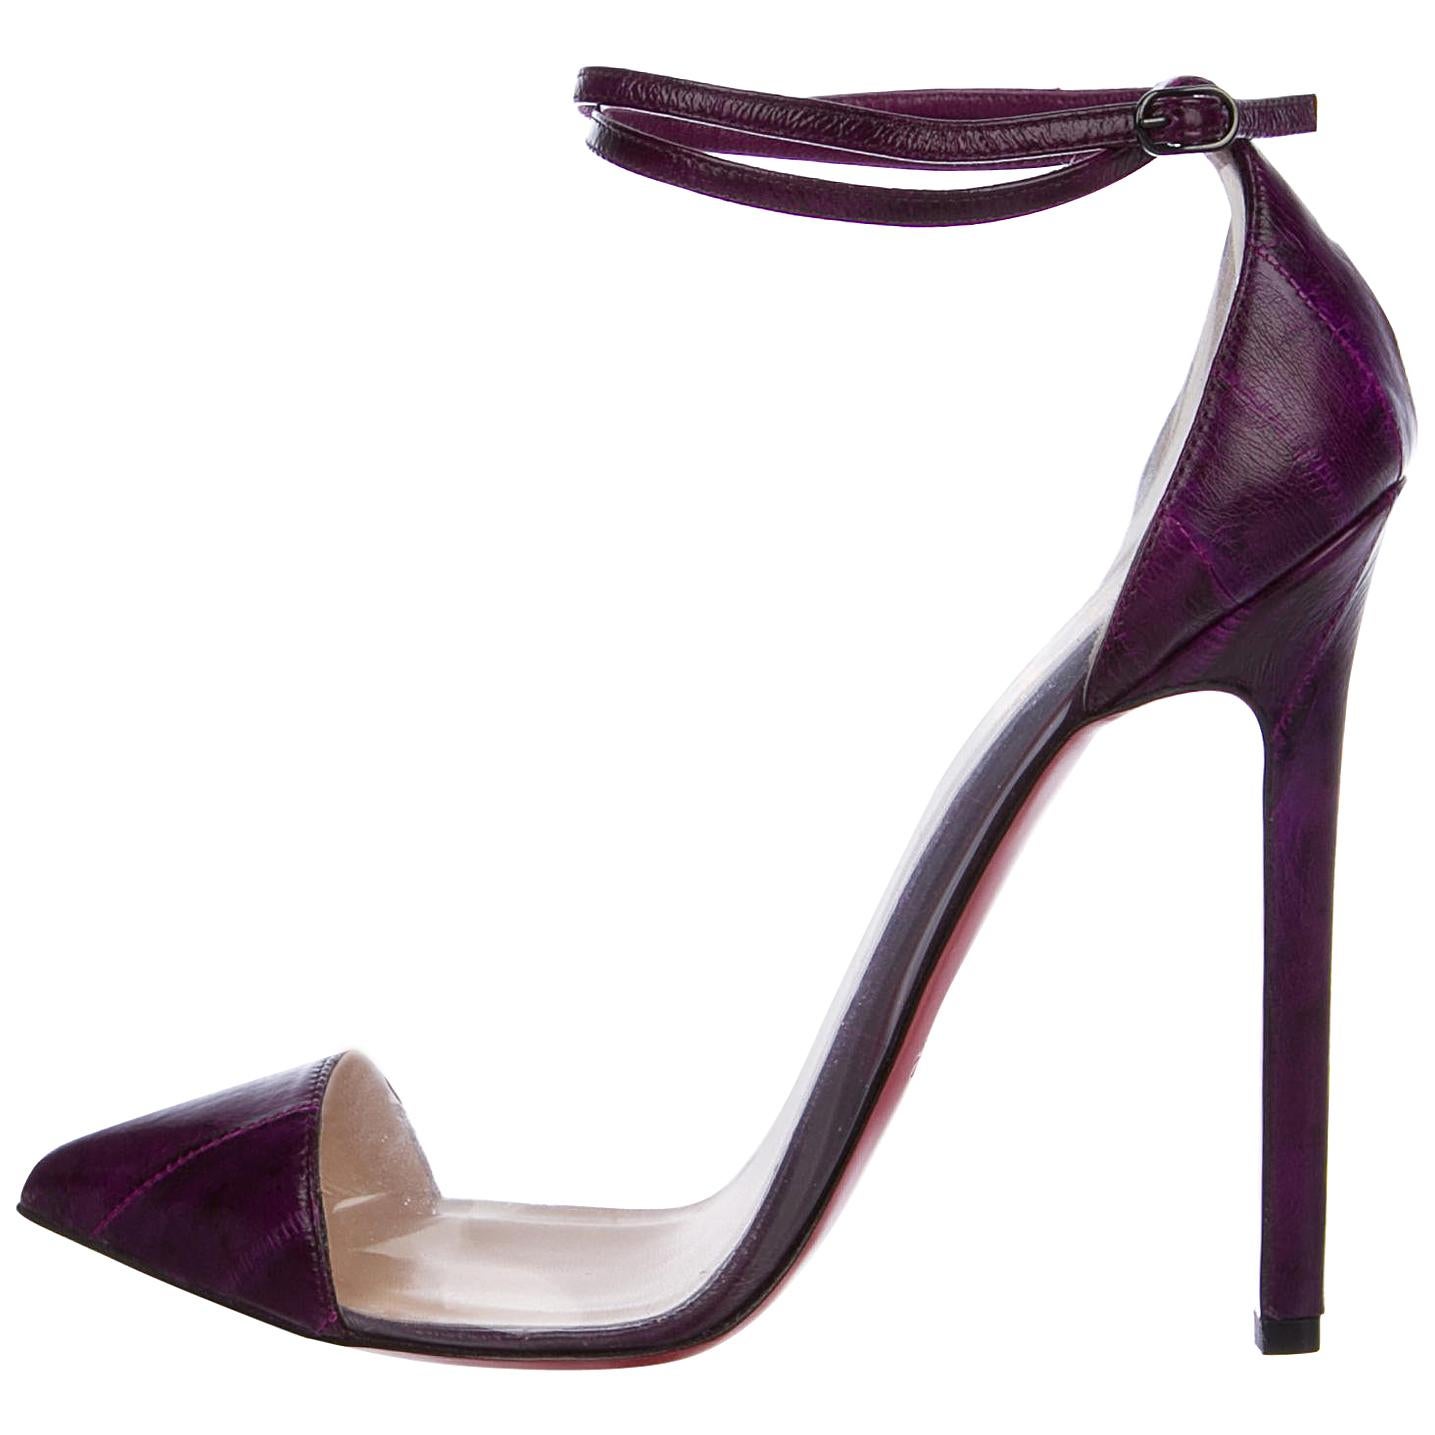 Christian Louboutin NEW Clear PVC Purple Leather Evening Pumps Heels in Box